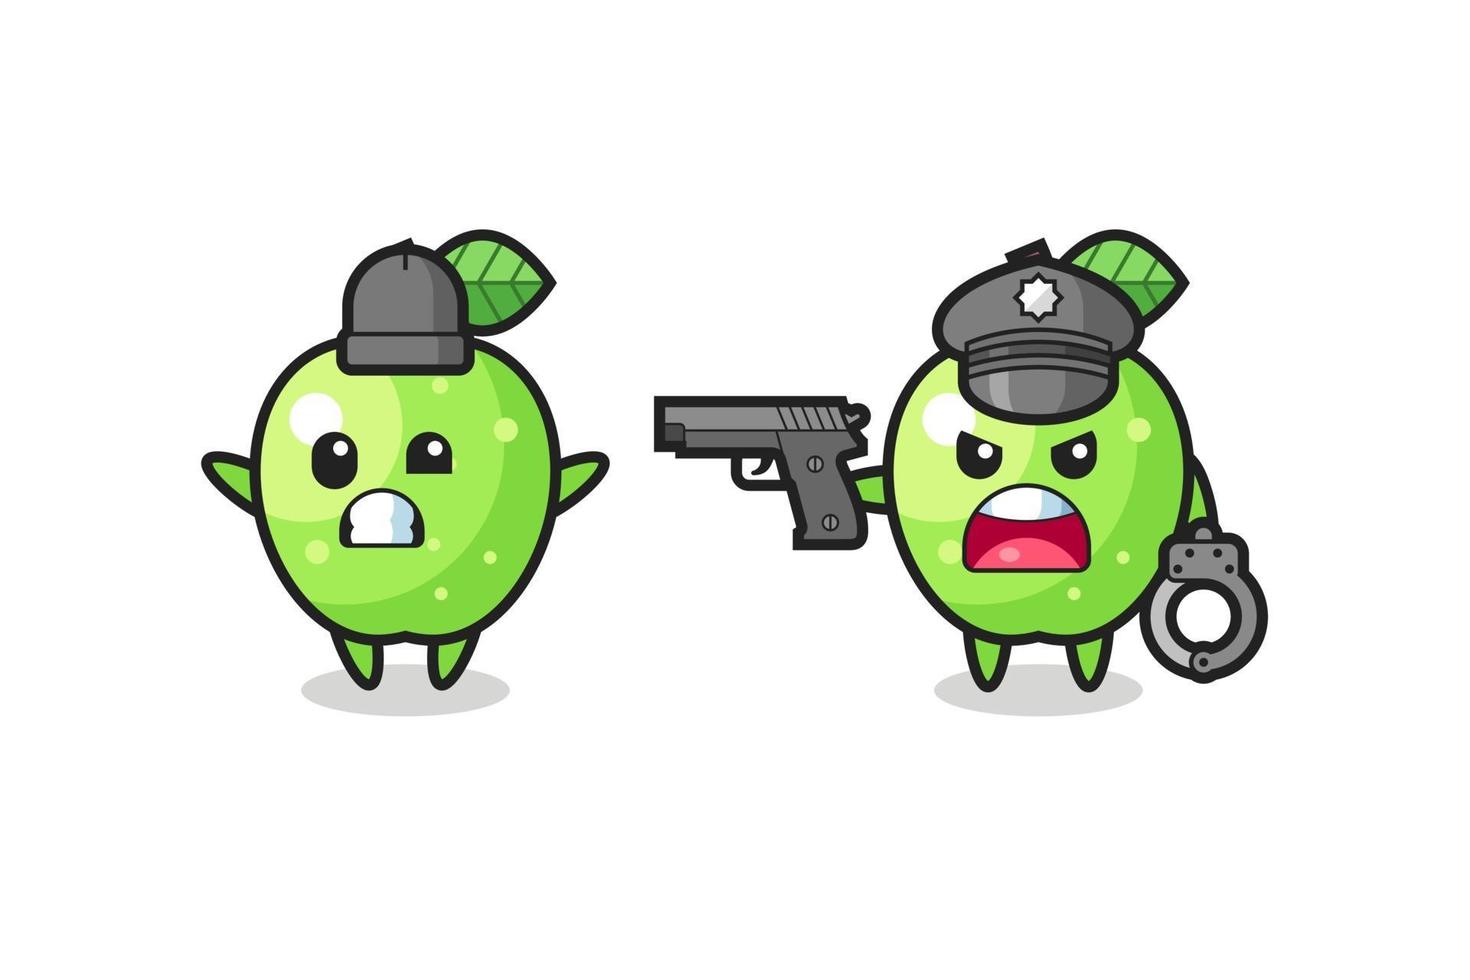 illustration of green apple robber with hands up pose caught by police vector